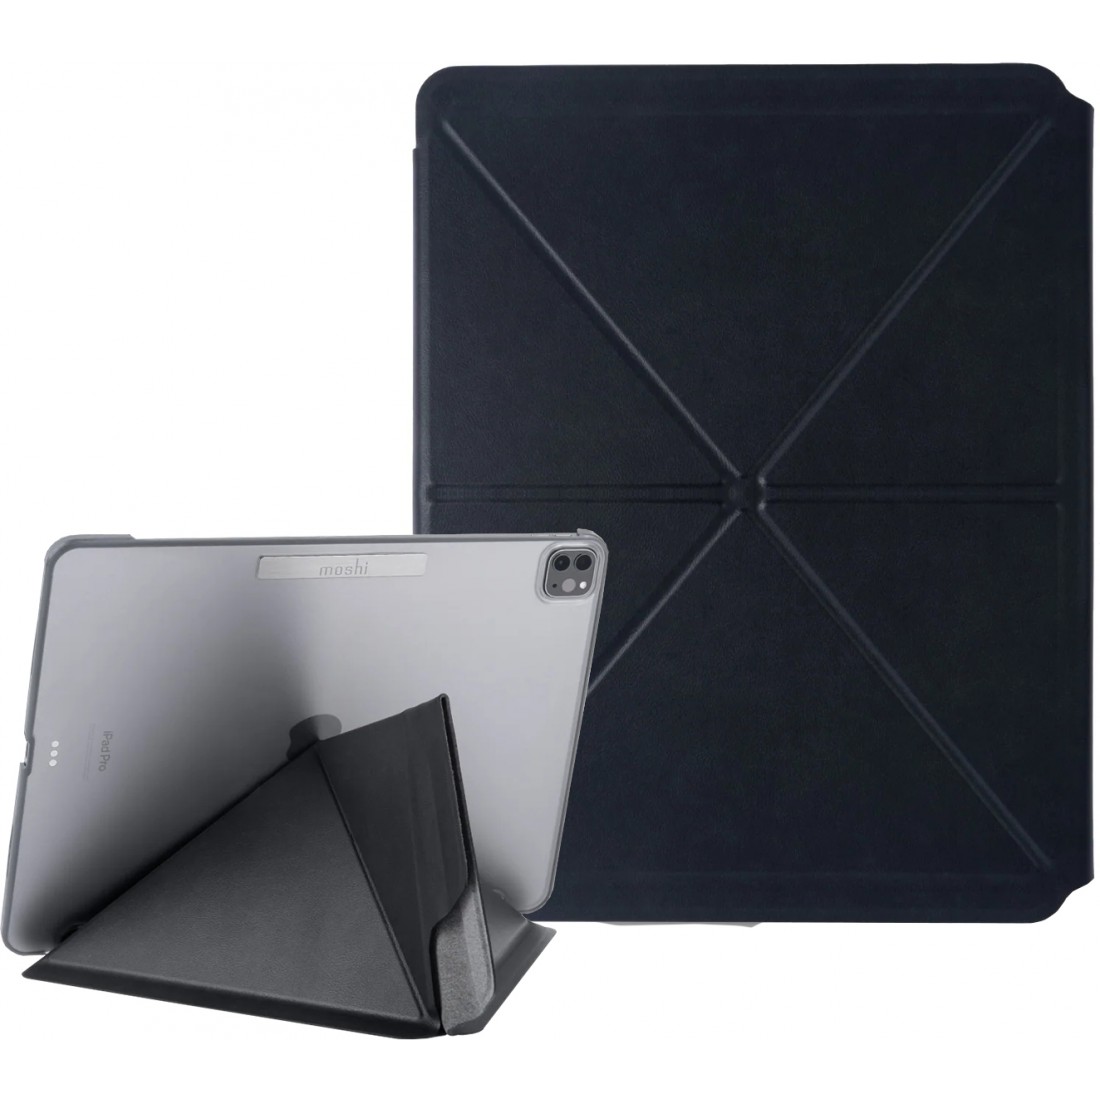 Moshi VersaCover Case with Folding Cover Charcoal Black for iPad Pro 12.9" (6th-5th Gen) (99MO231604)